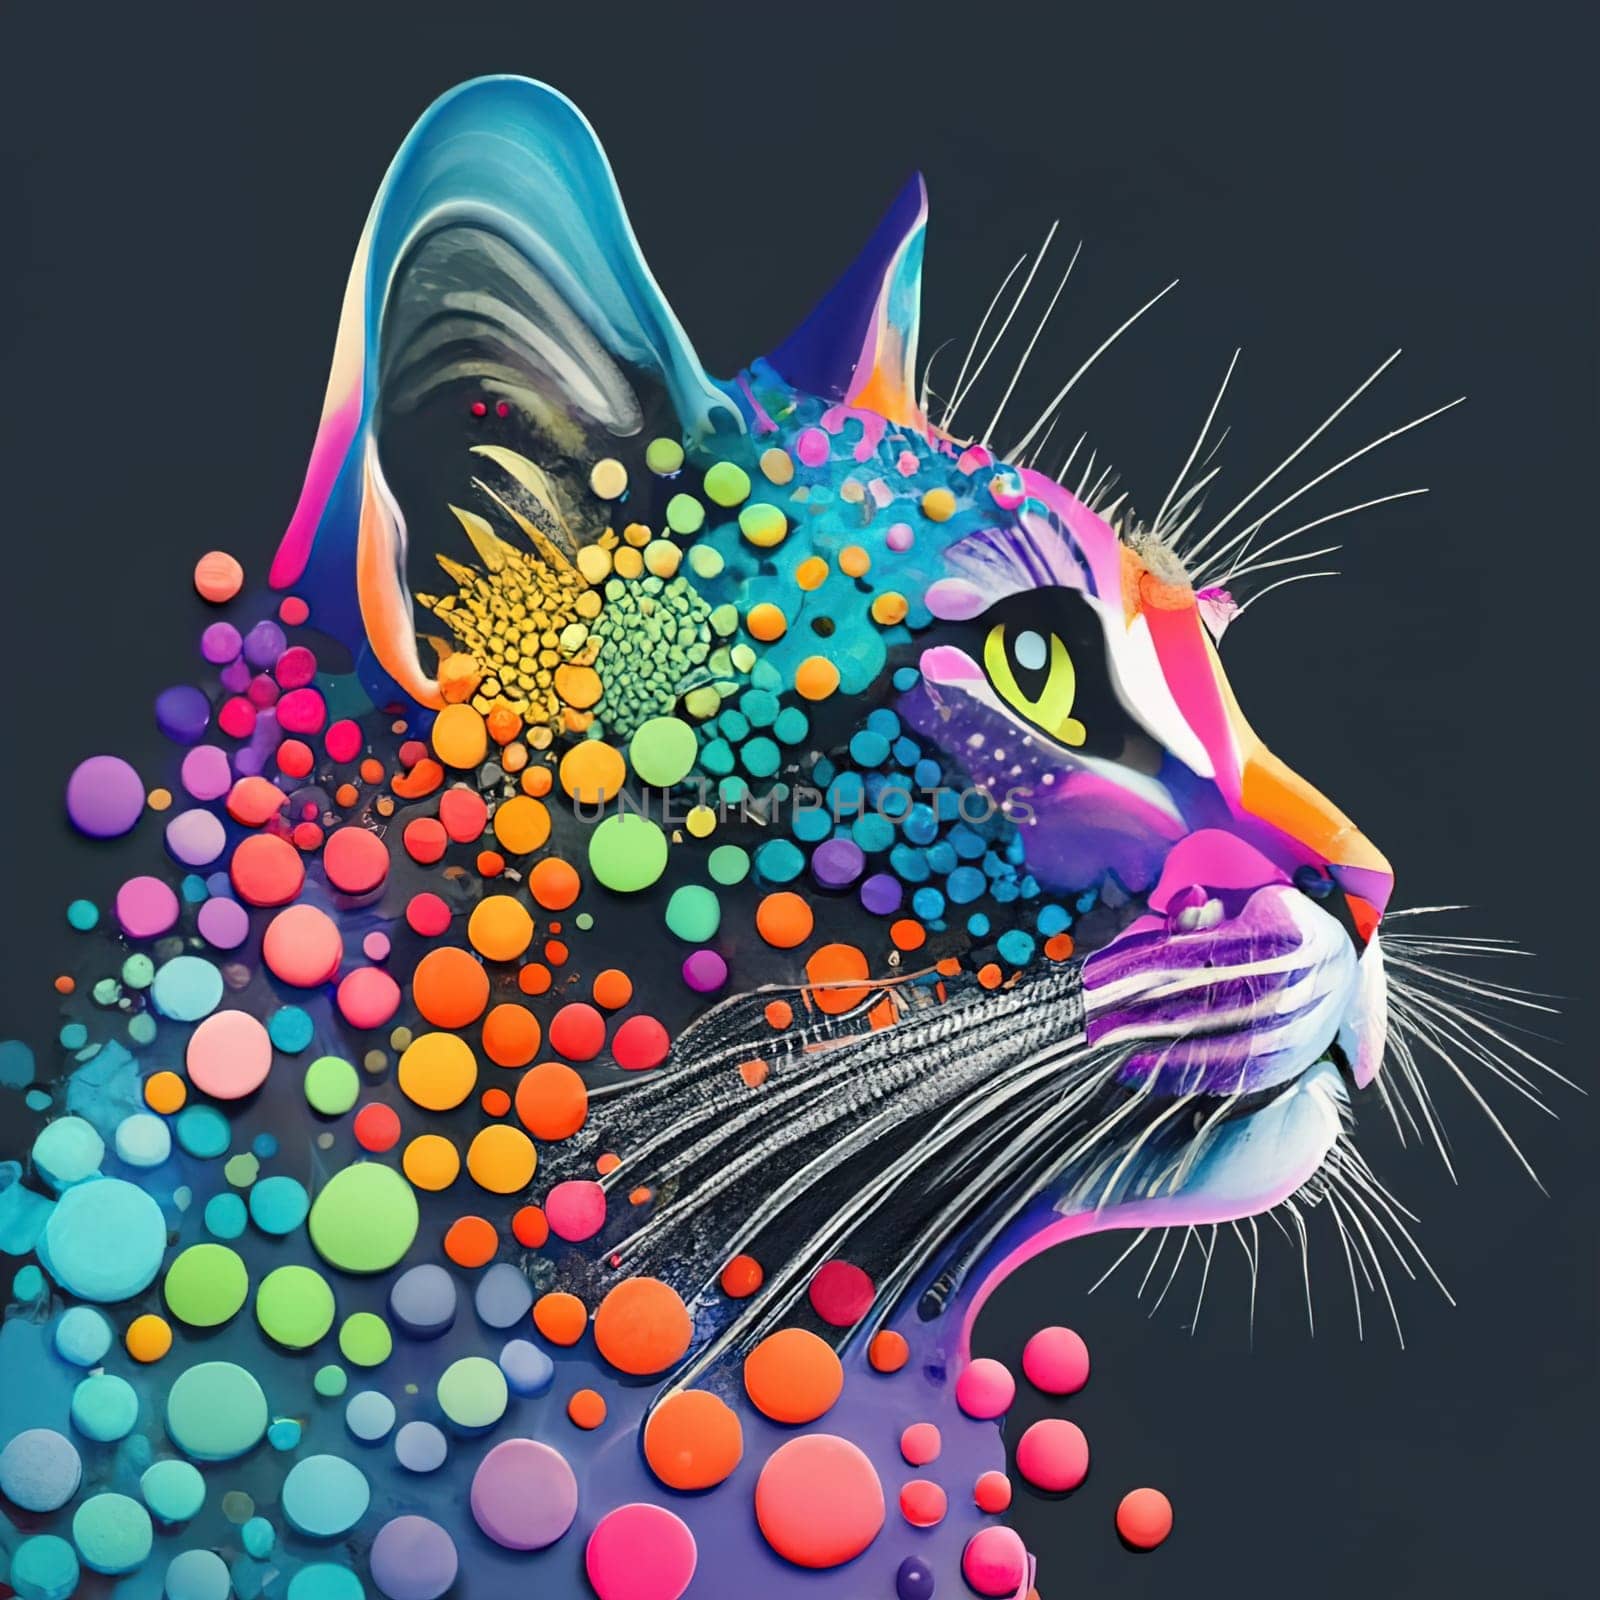 Colorful Dotted Cat Silhouette - Creative Artistic Concept with Vibrant Dots by igor010